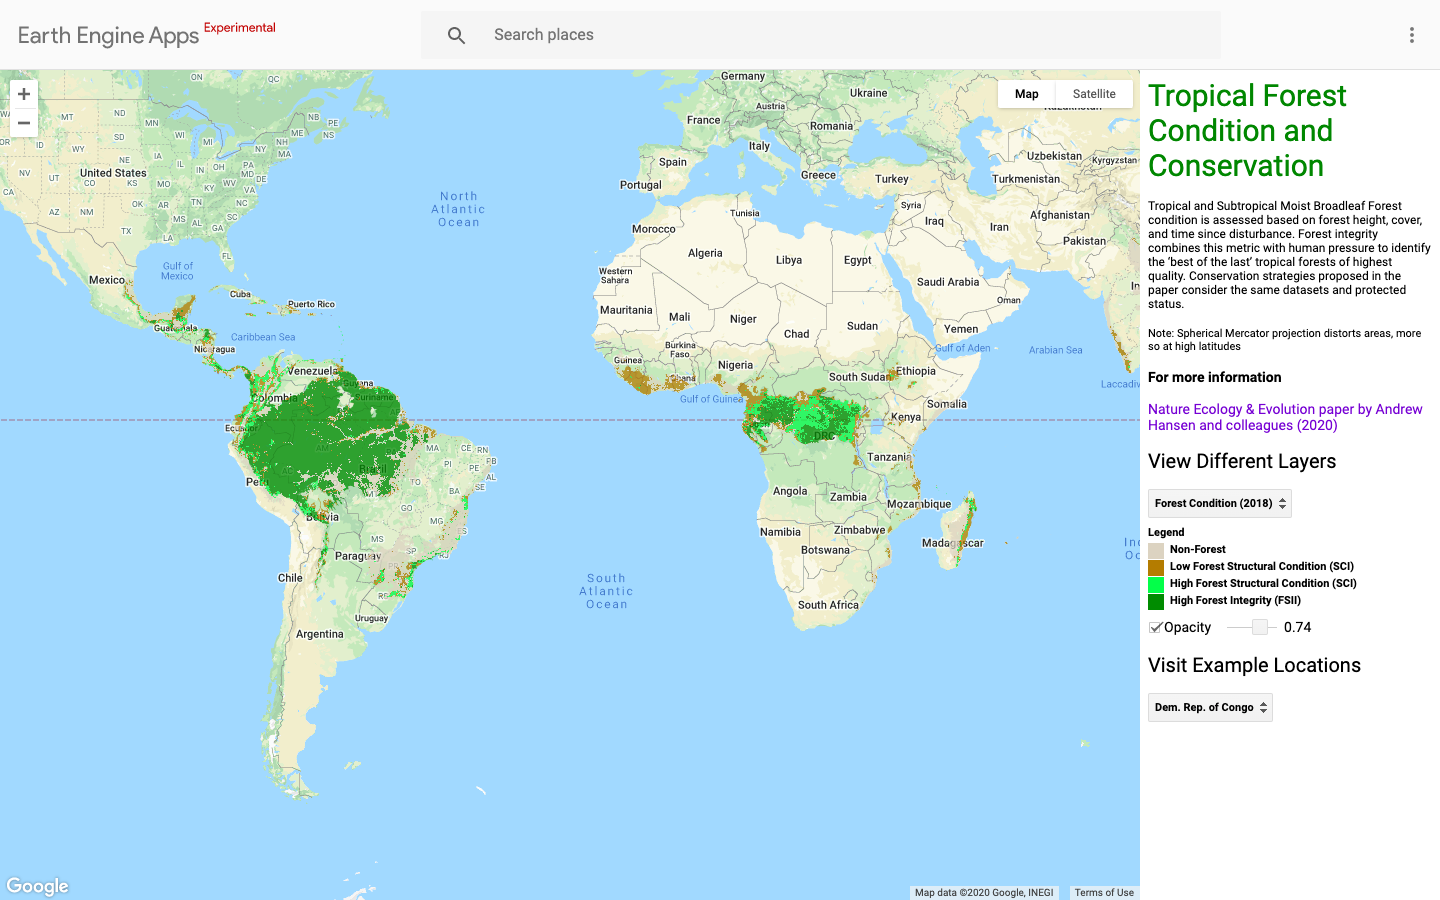 Image of website tool used to map quality and extent of tropical forests